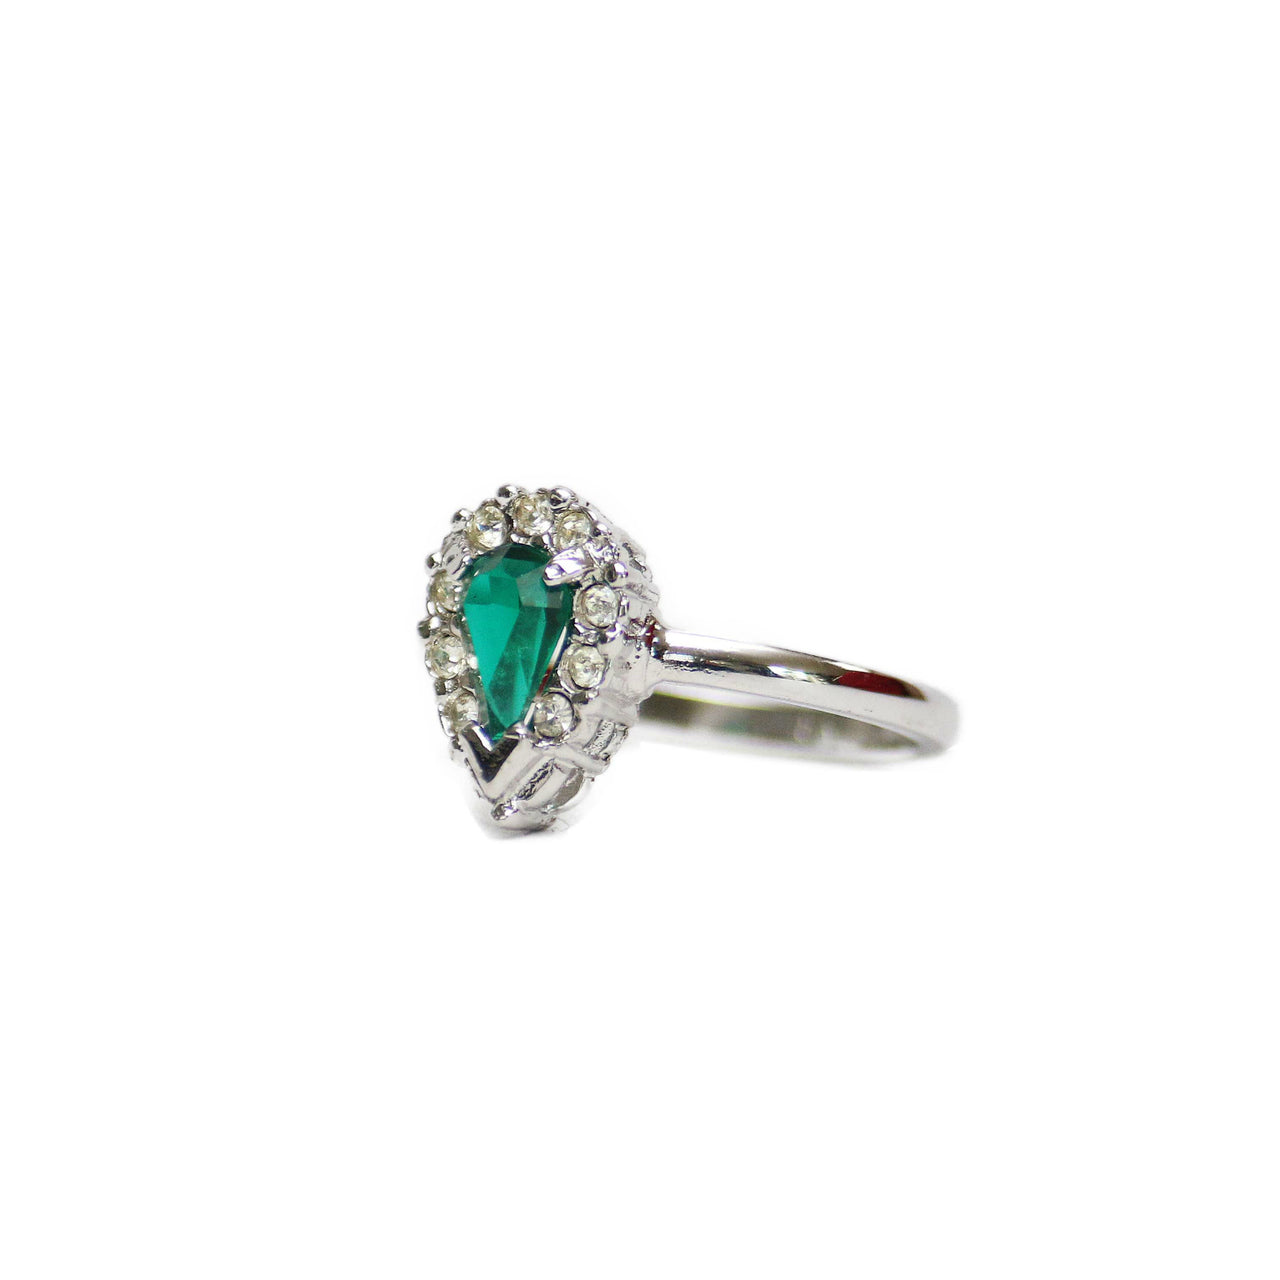 Vintage Ring Teardrop Emerald and Clear Swarovski Crystals 18k White Gold Silver  #R129 Size: 13